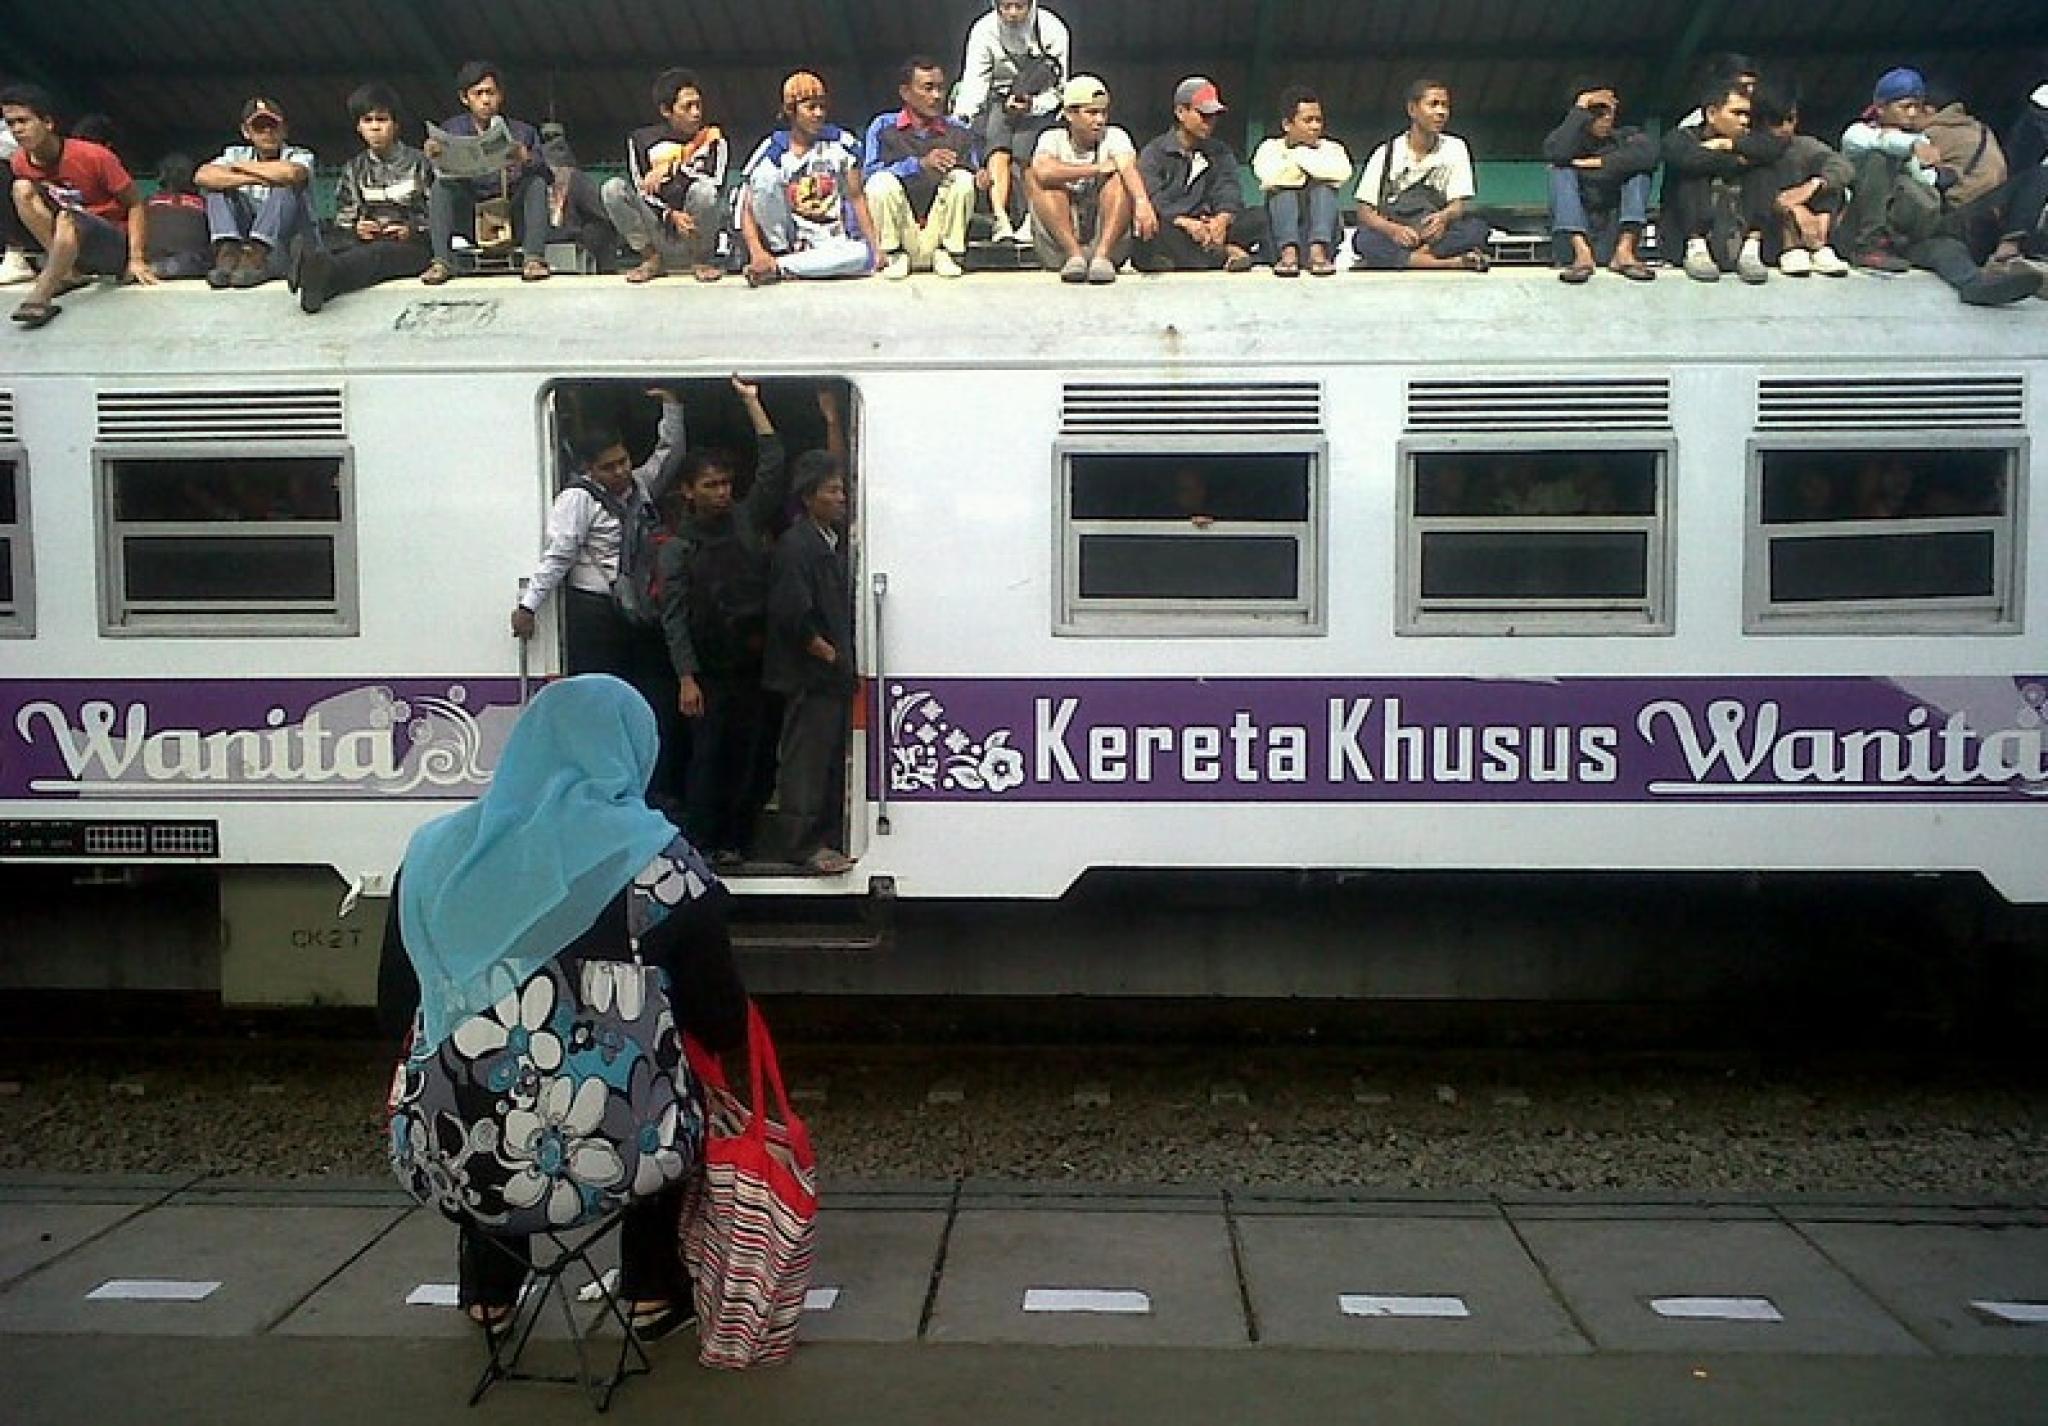 Image of Indonesian ‘women only' train carriage with male passengers, by Ulez Saja ah from https://flic.kr/p/a2Qnkn, free to use under CC BY-NC-ND 2.0 licence 